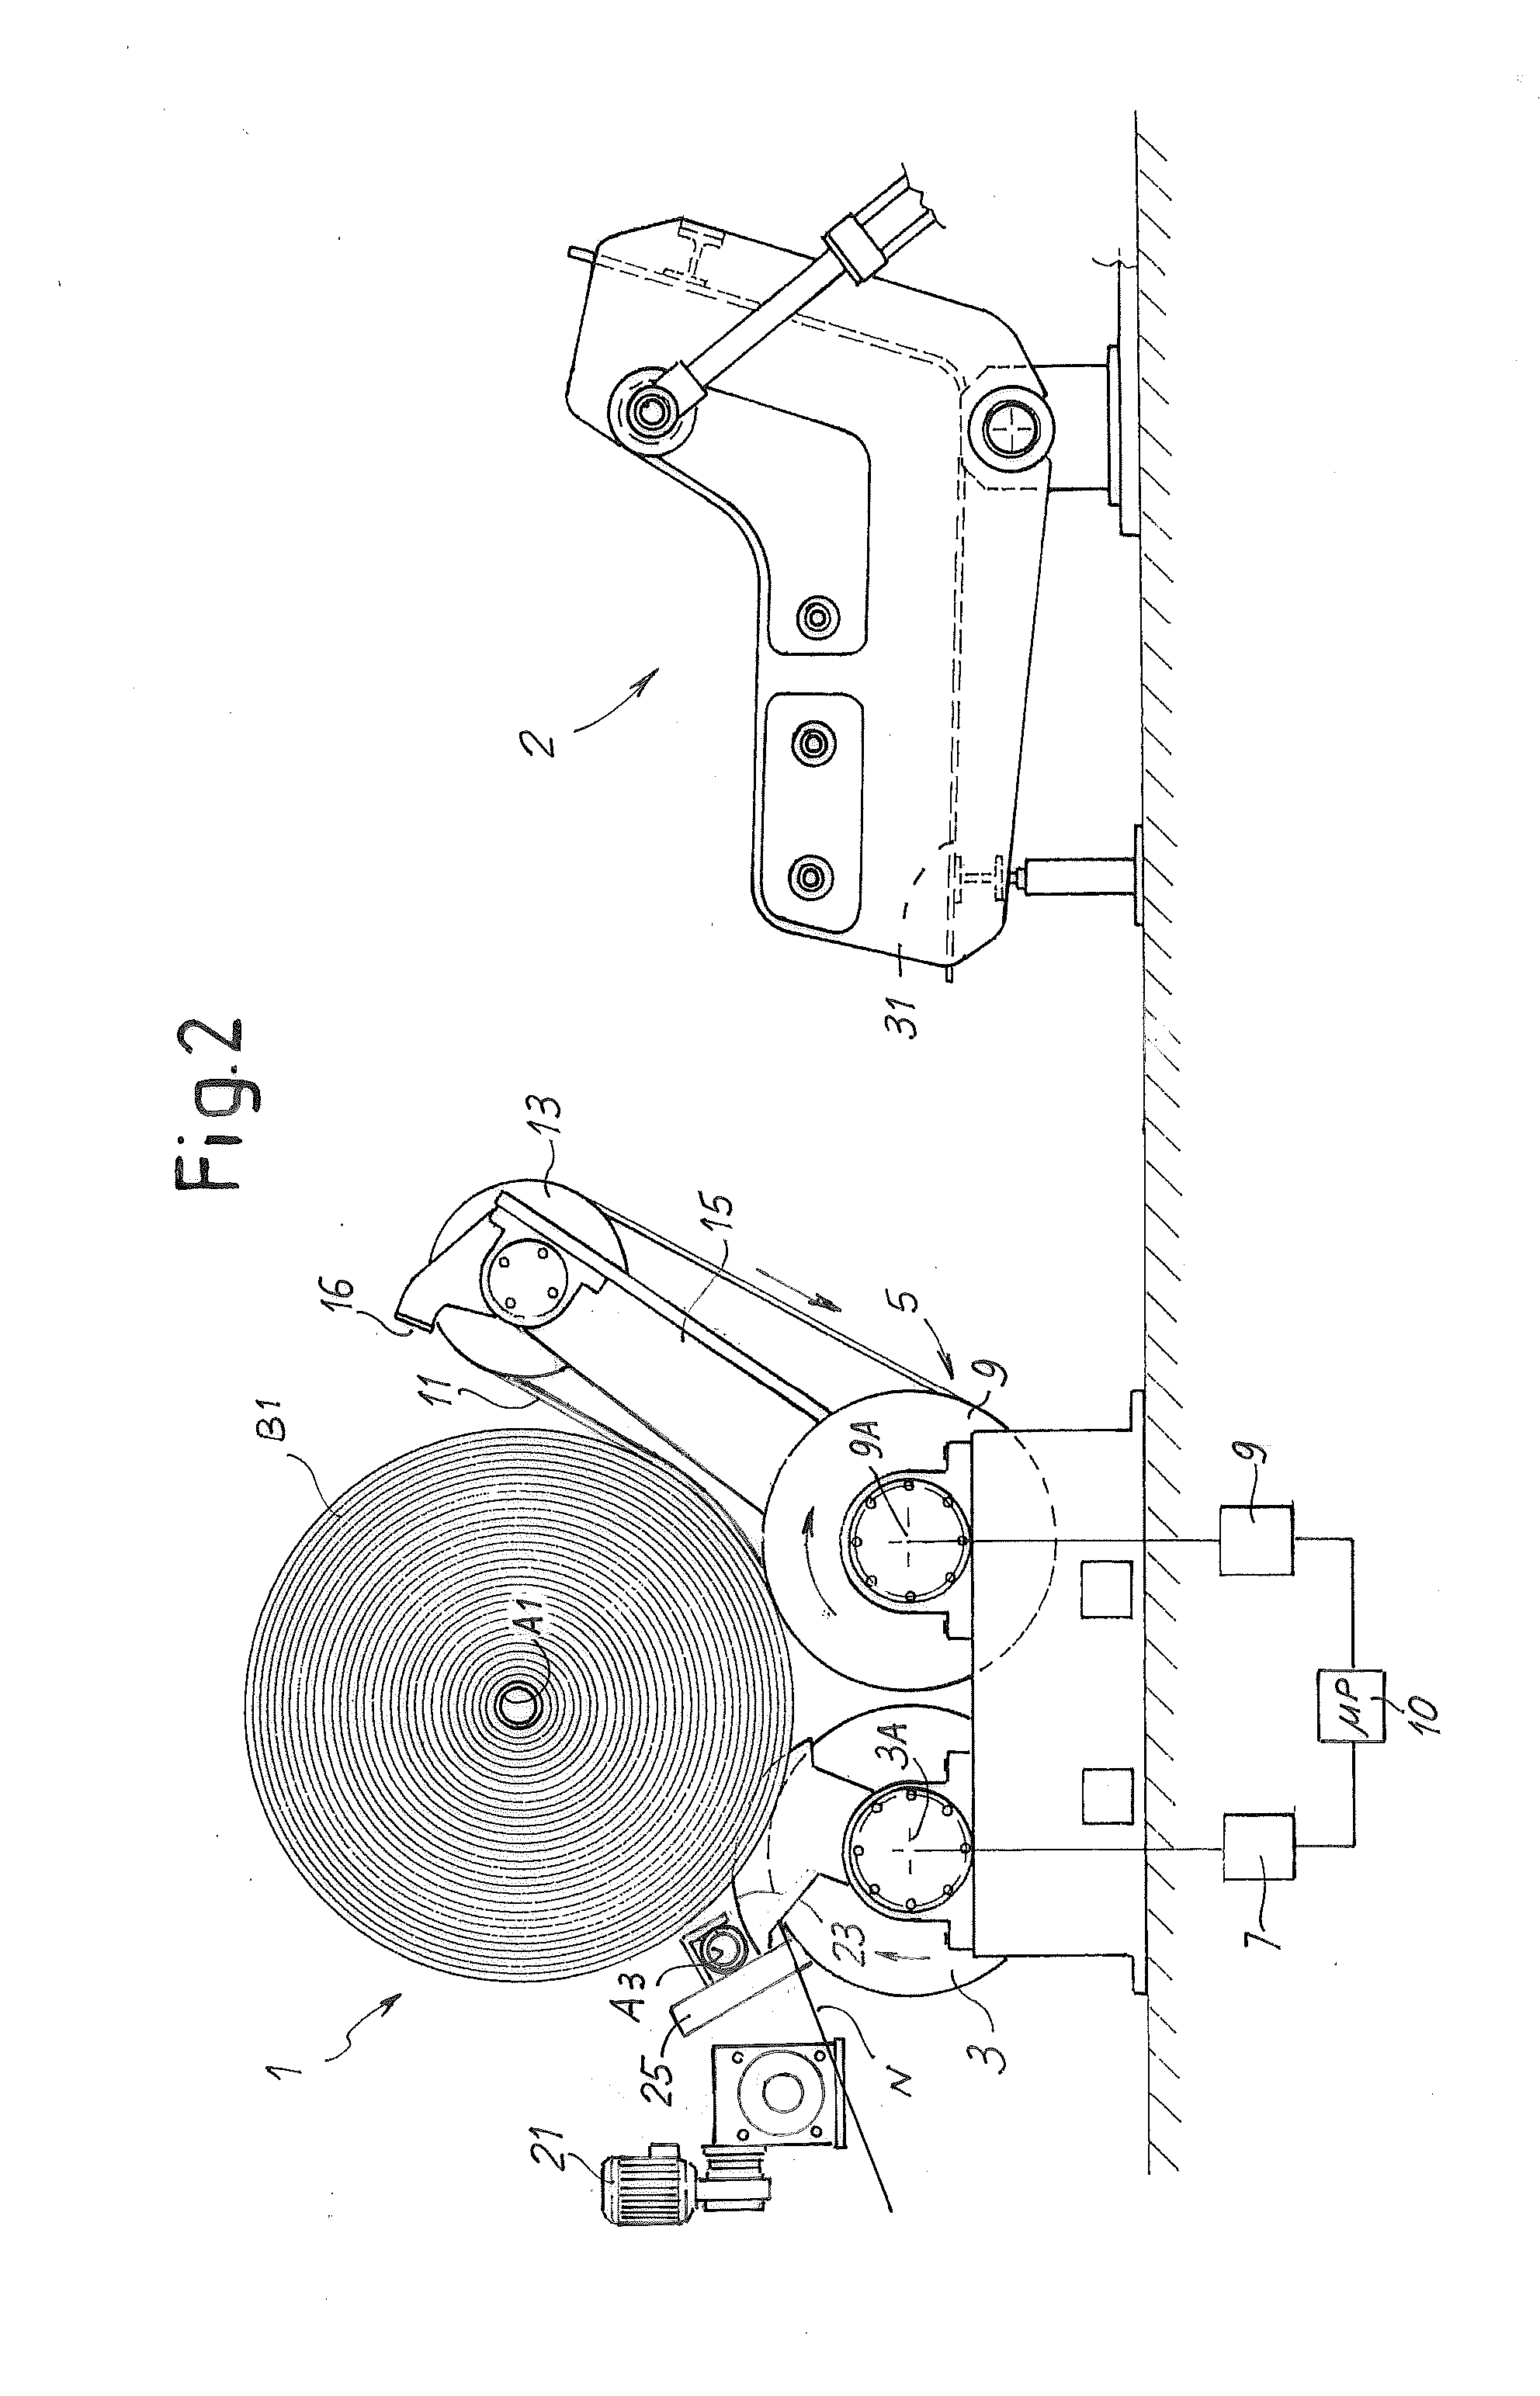 Machine and method for winding reels of web material